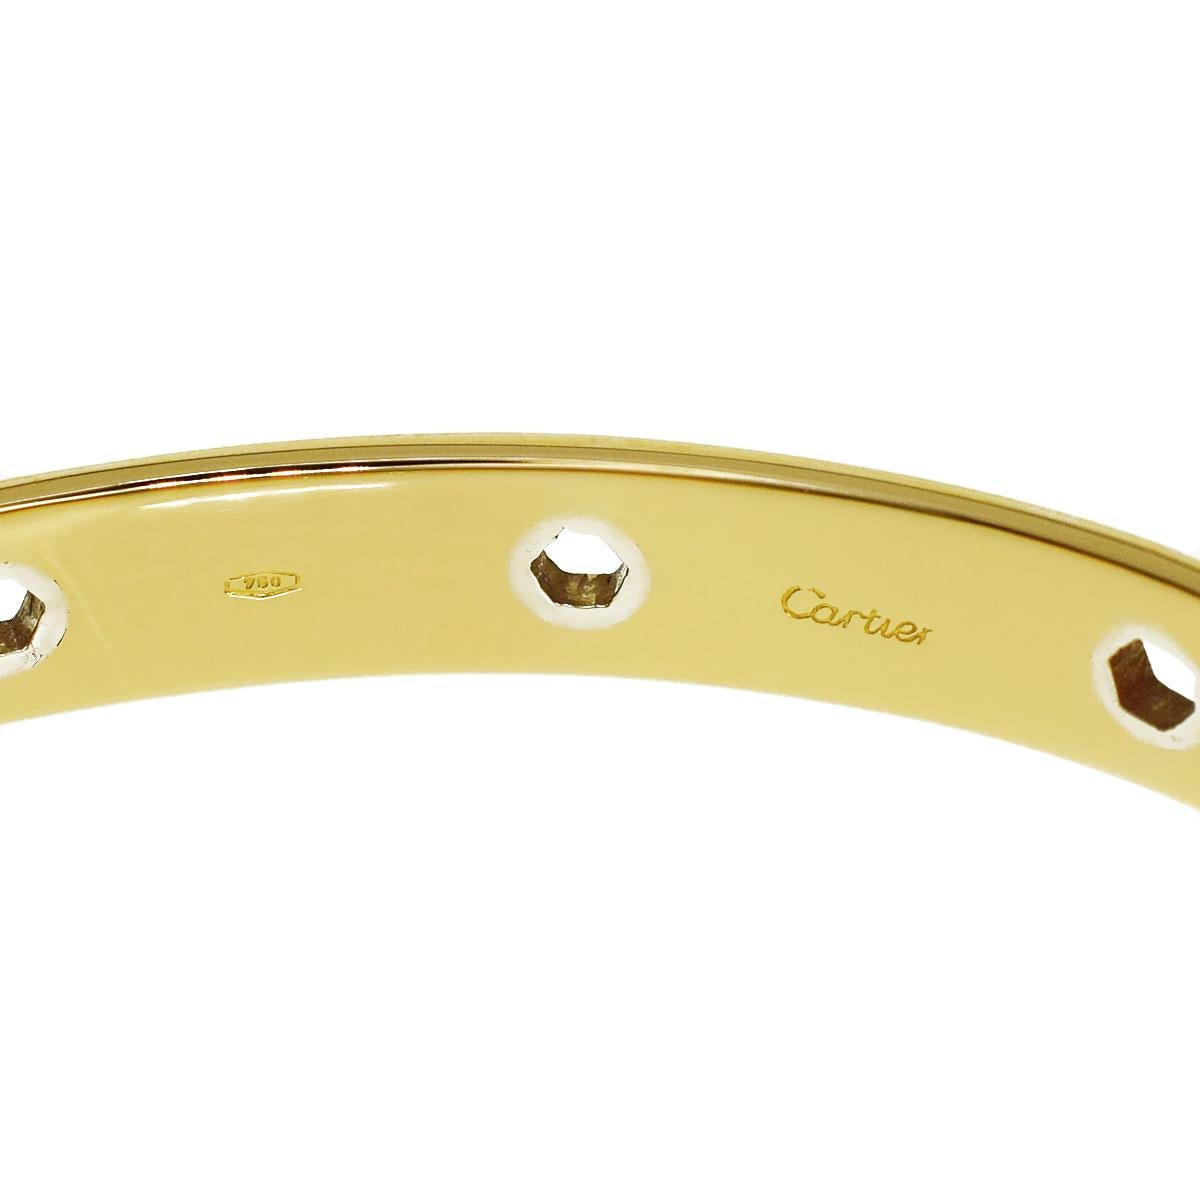 An incredibly rare Cartier Love series yellow gold bangle bracelet featuring hexagon white gold motifs embedded in 18k yellow gold. The bracelet measures 16cm, 6.29 